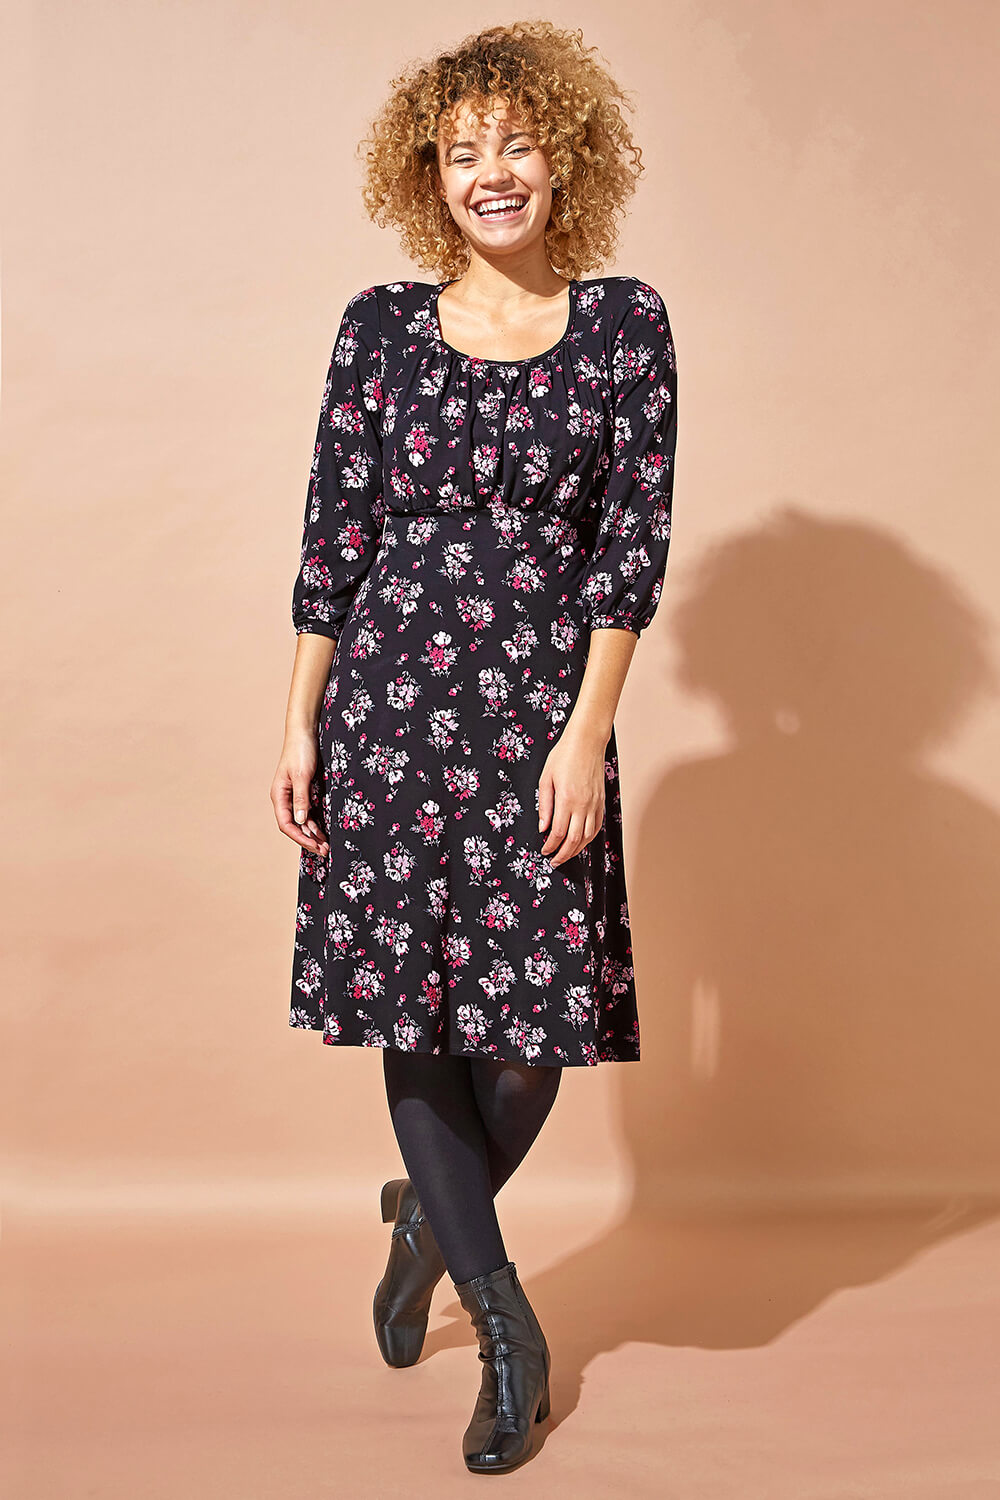 PINK Square Neck Floral Stretch Dress, Image 3 of 4